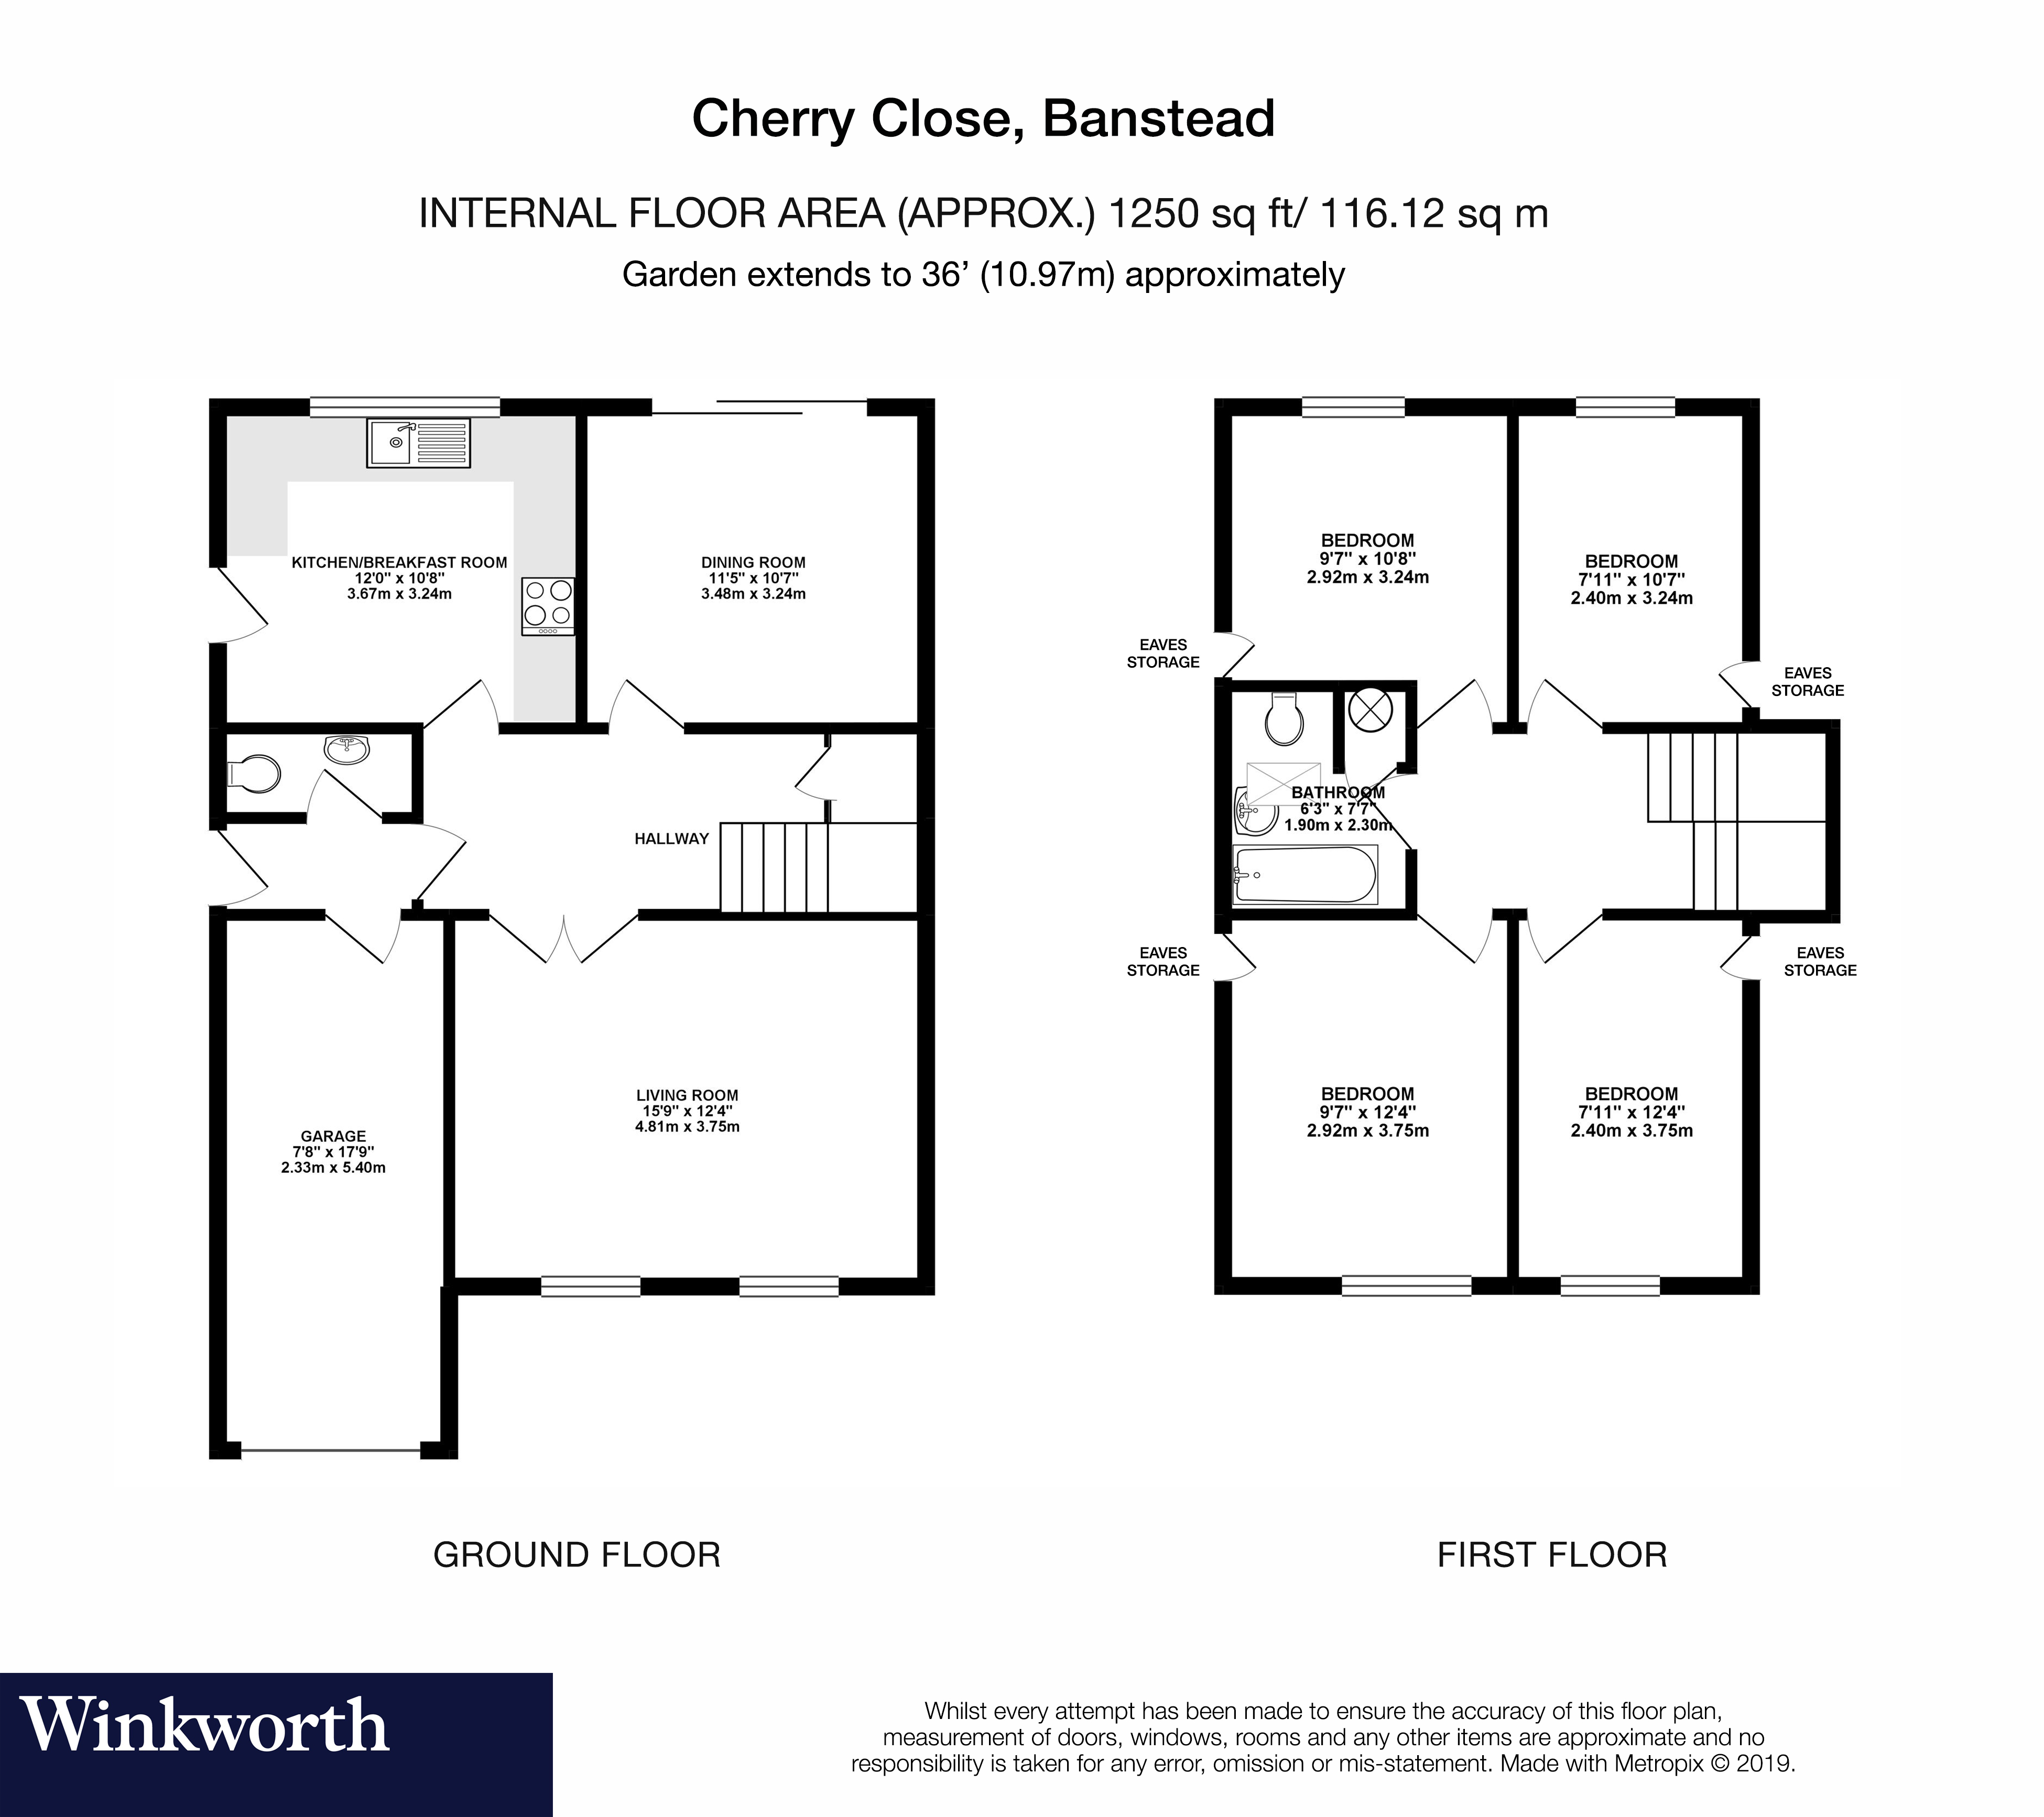 4 Bedrooms Detached house for sale in Cherry Close, Banstead, Surrey SM7